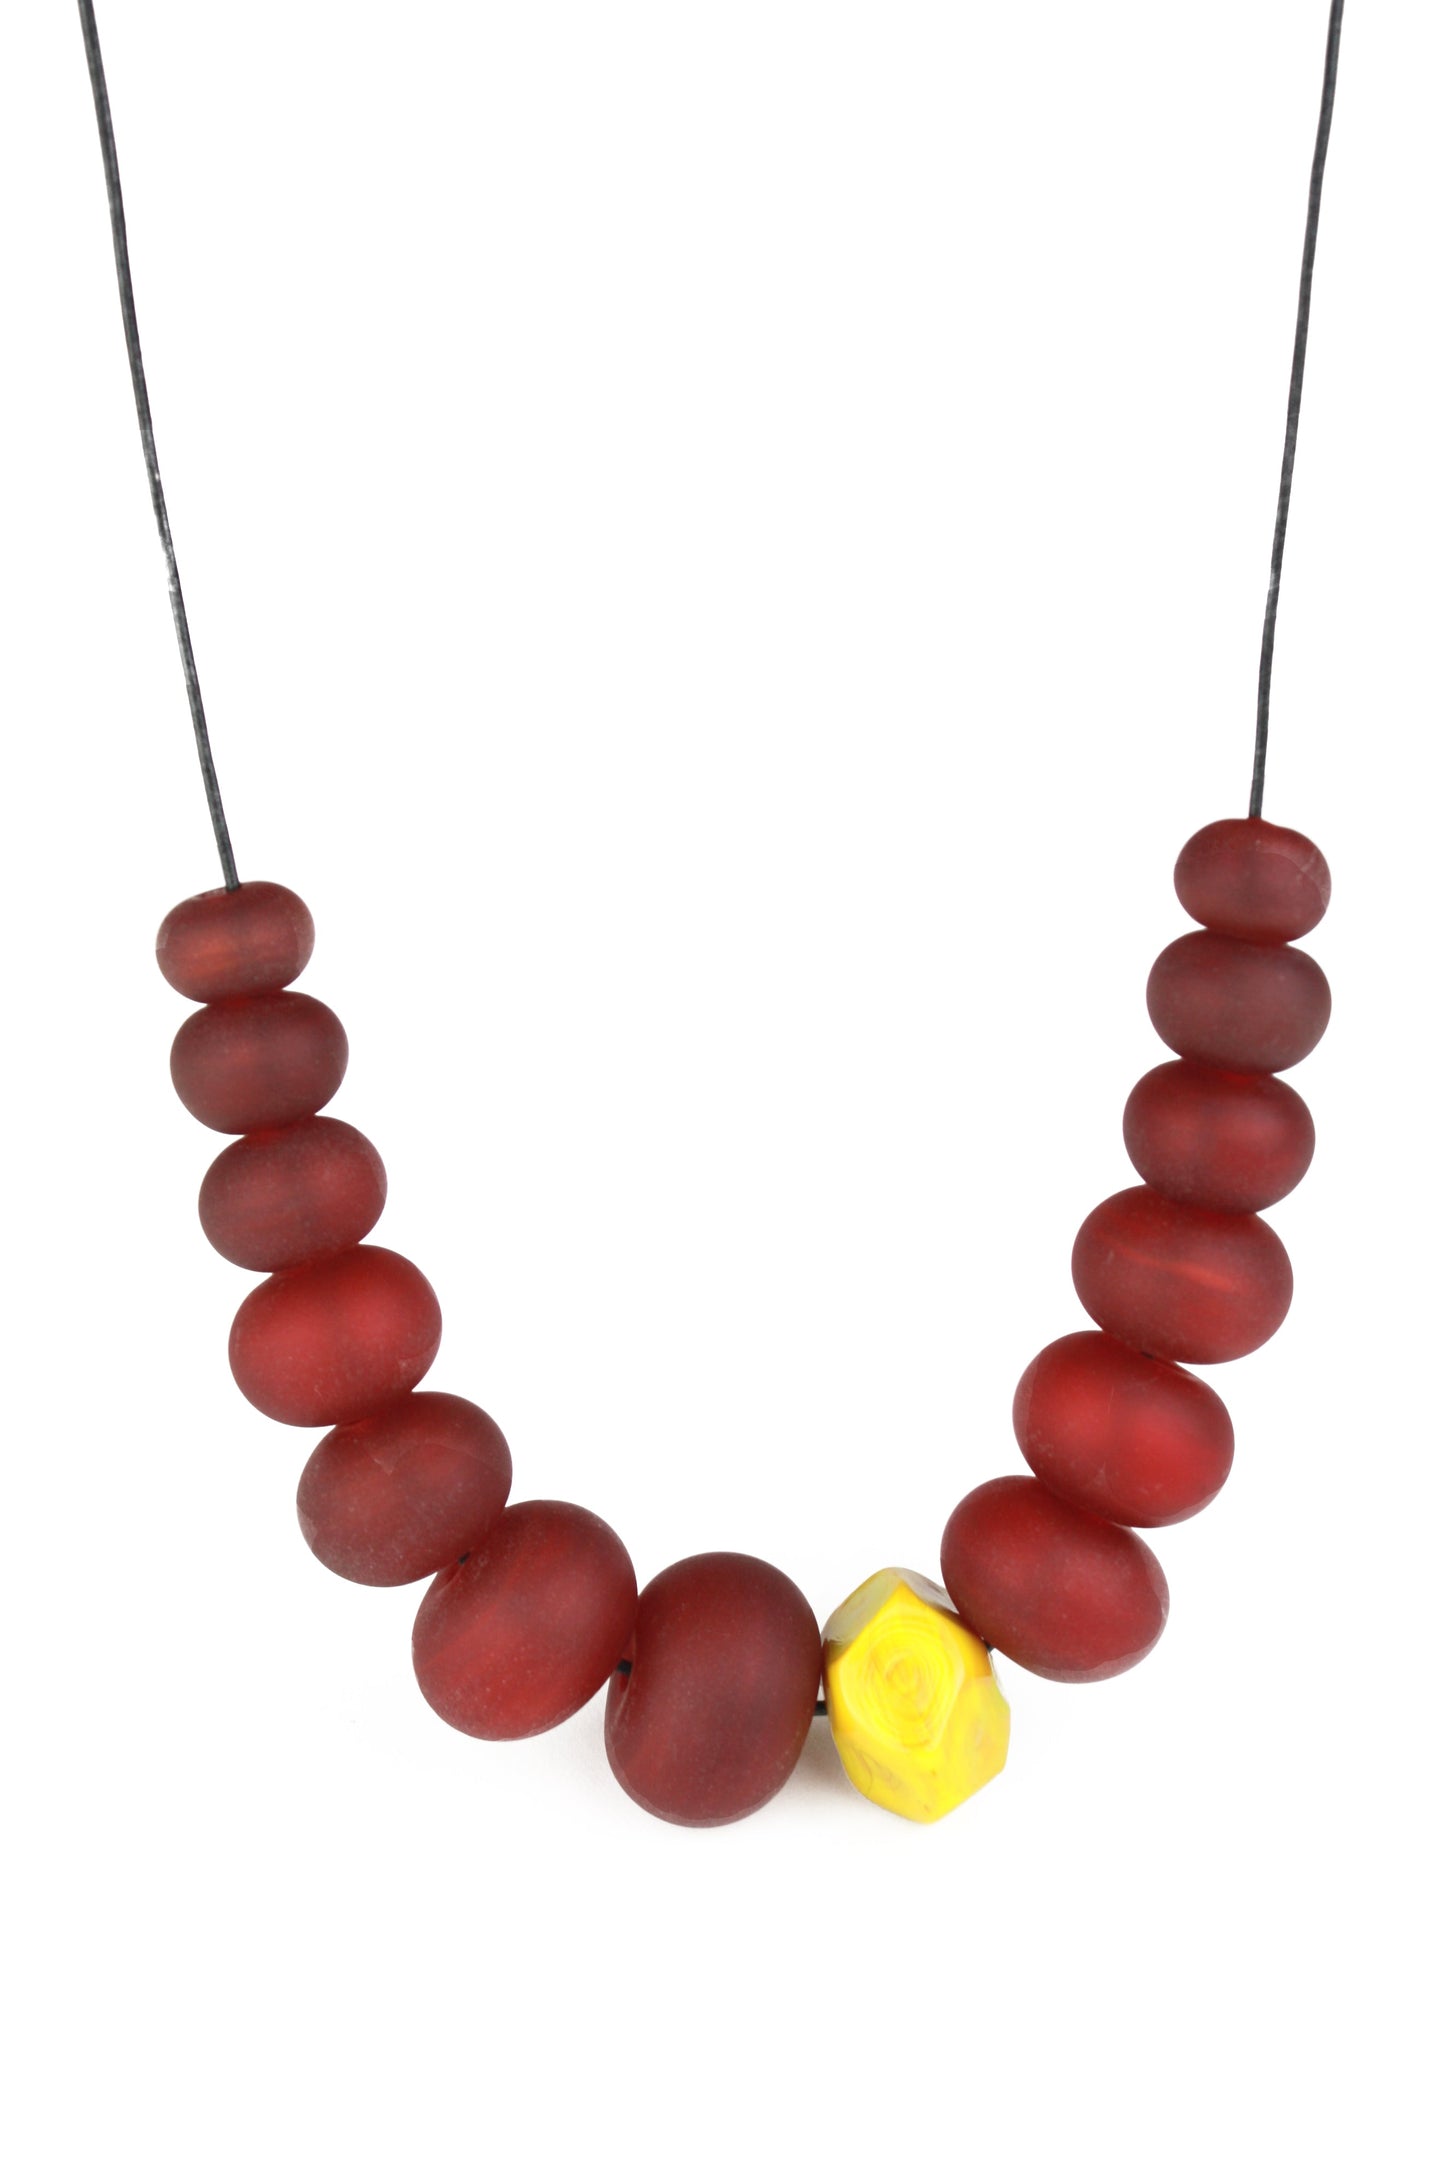 Necklace of hand blown and sandblasted hollow beads in rich deep red glass paired with a ochre yellow glass nugget bead and strung on adjustable leather